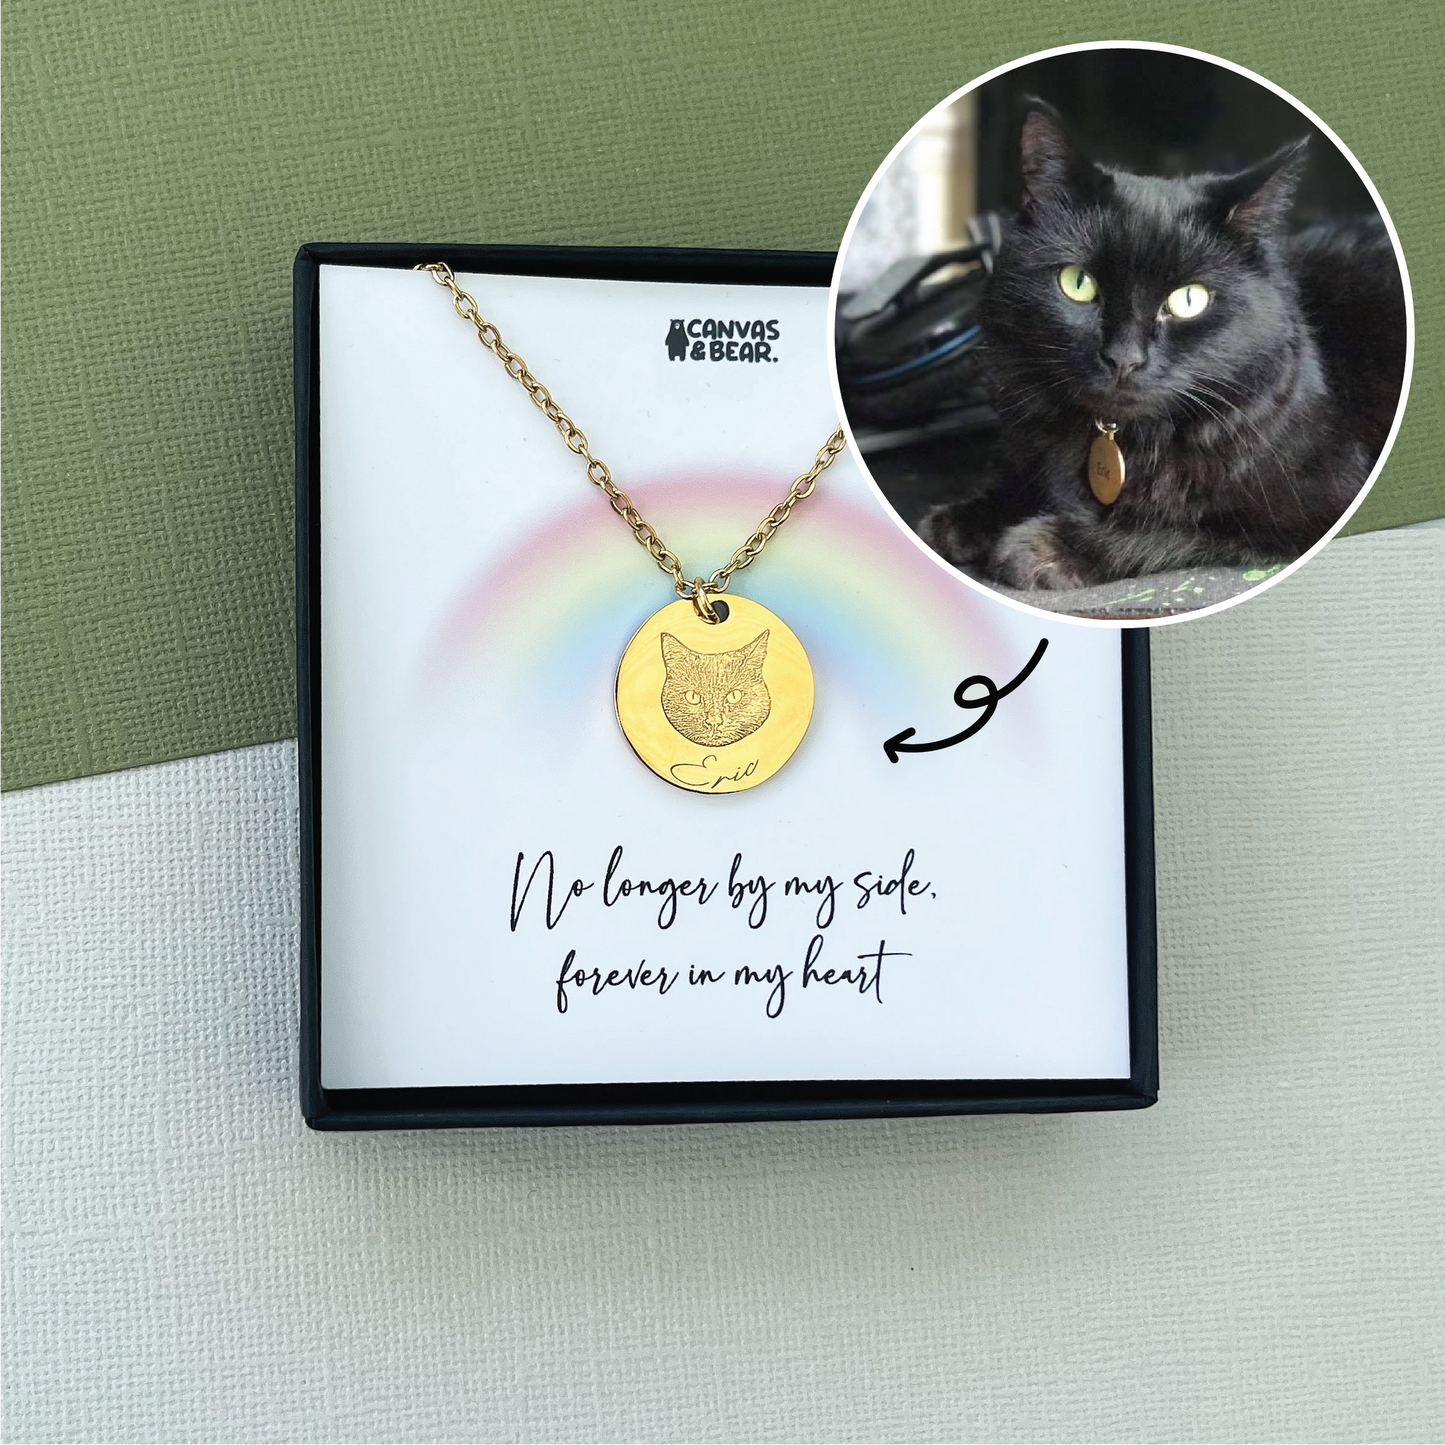 A personalised pet portrait necklace in a black gift box with a gift note reading "No longer by my side, forever in my heart." with a light rainbow design above the text. 